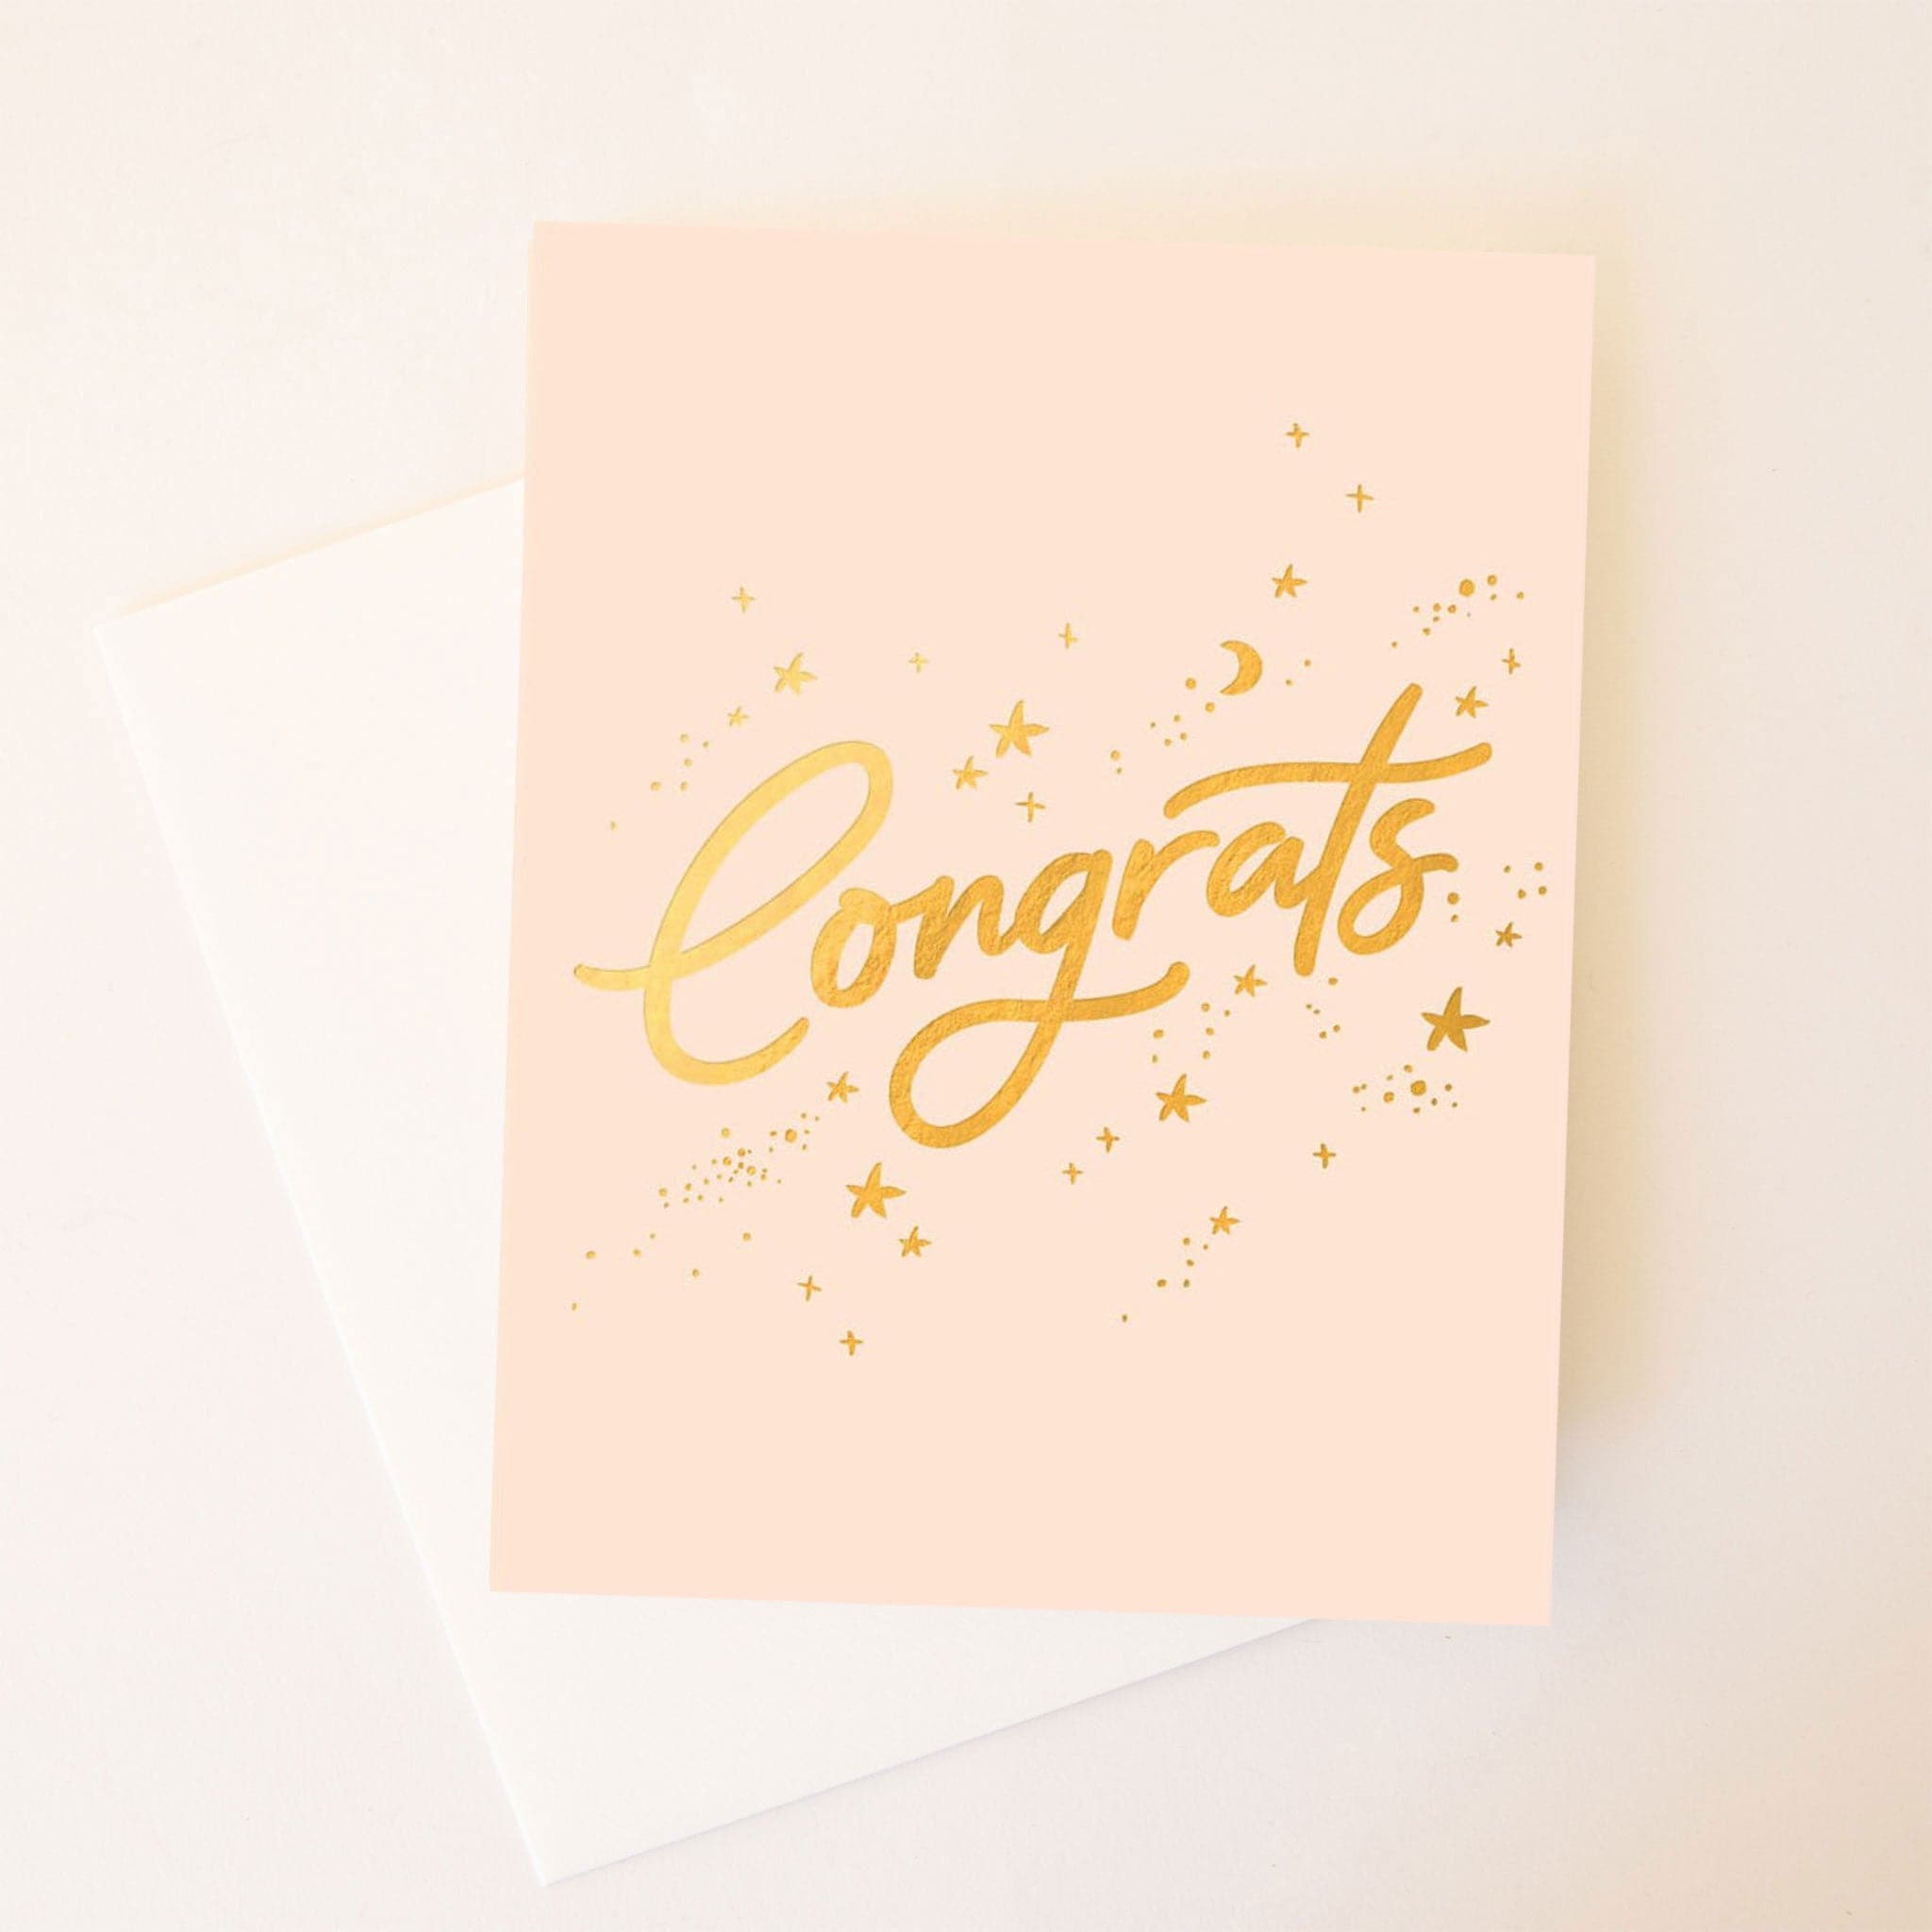 A light pink card with gold cursive writing on the front that says, "Congrats" along with small stars and moons around the word.